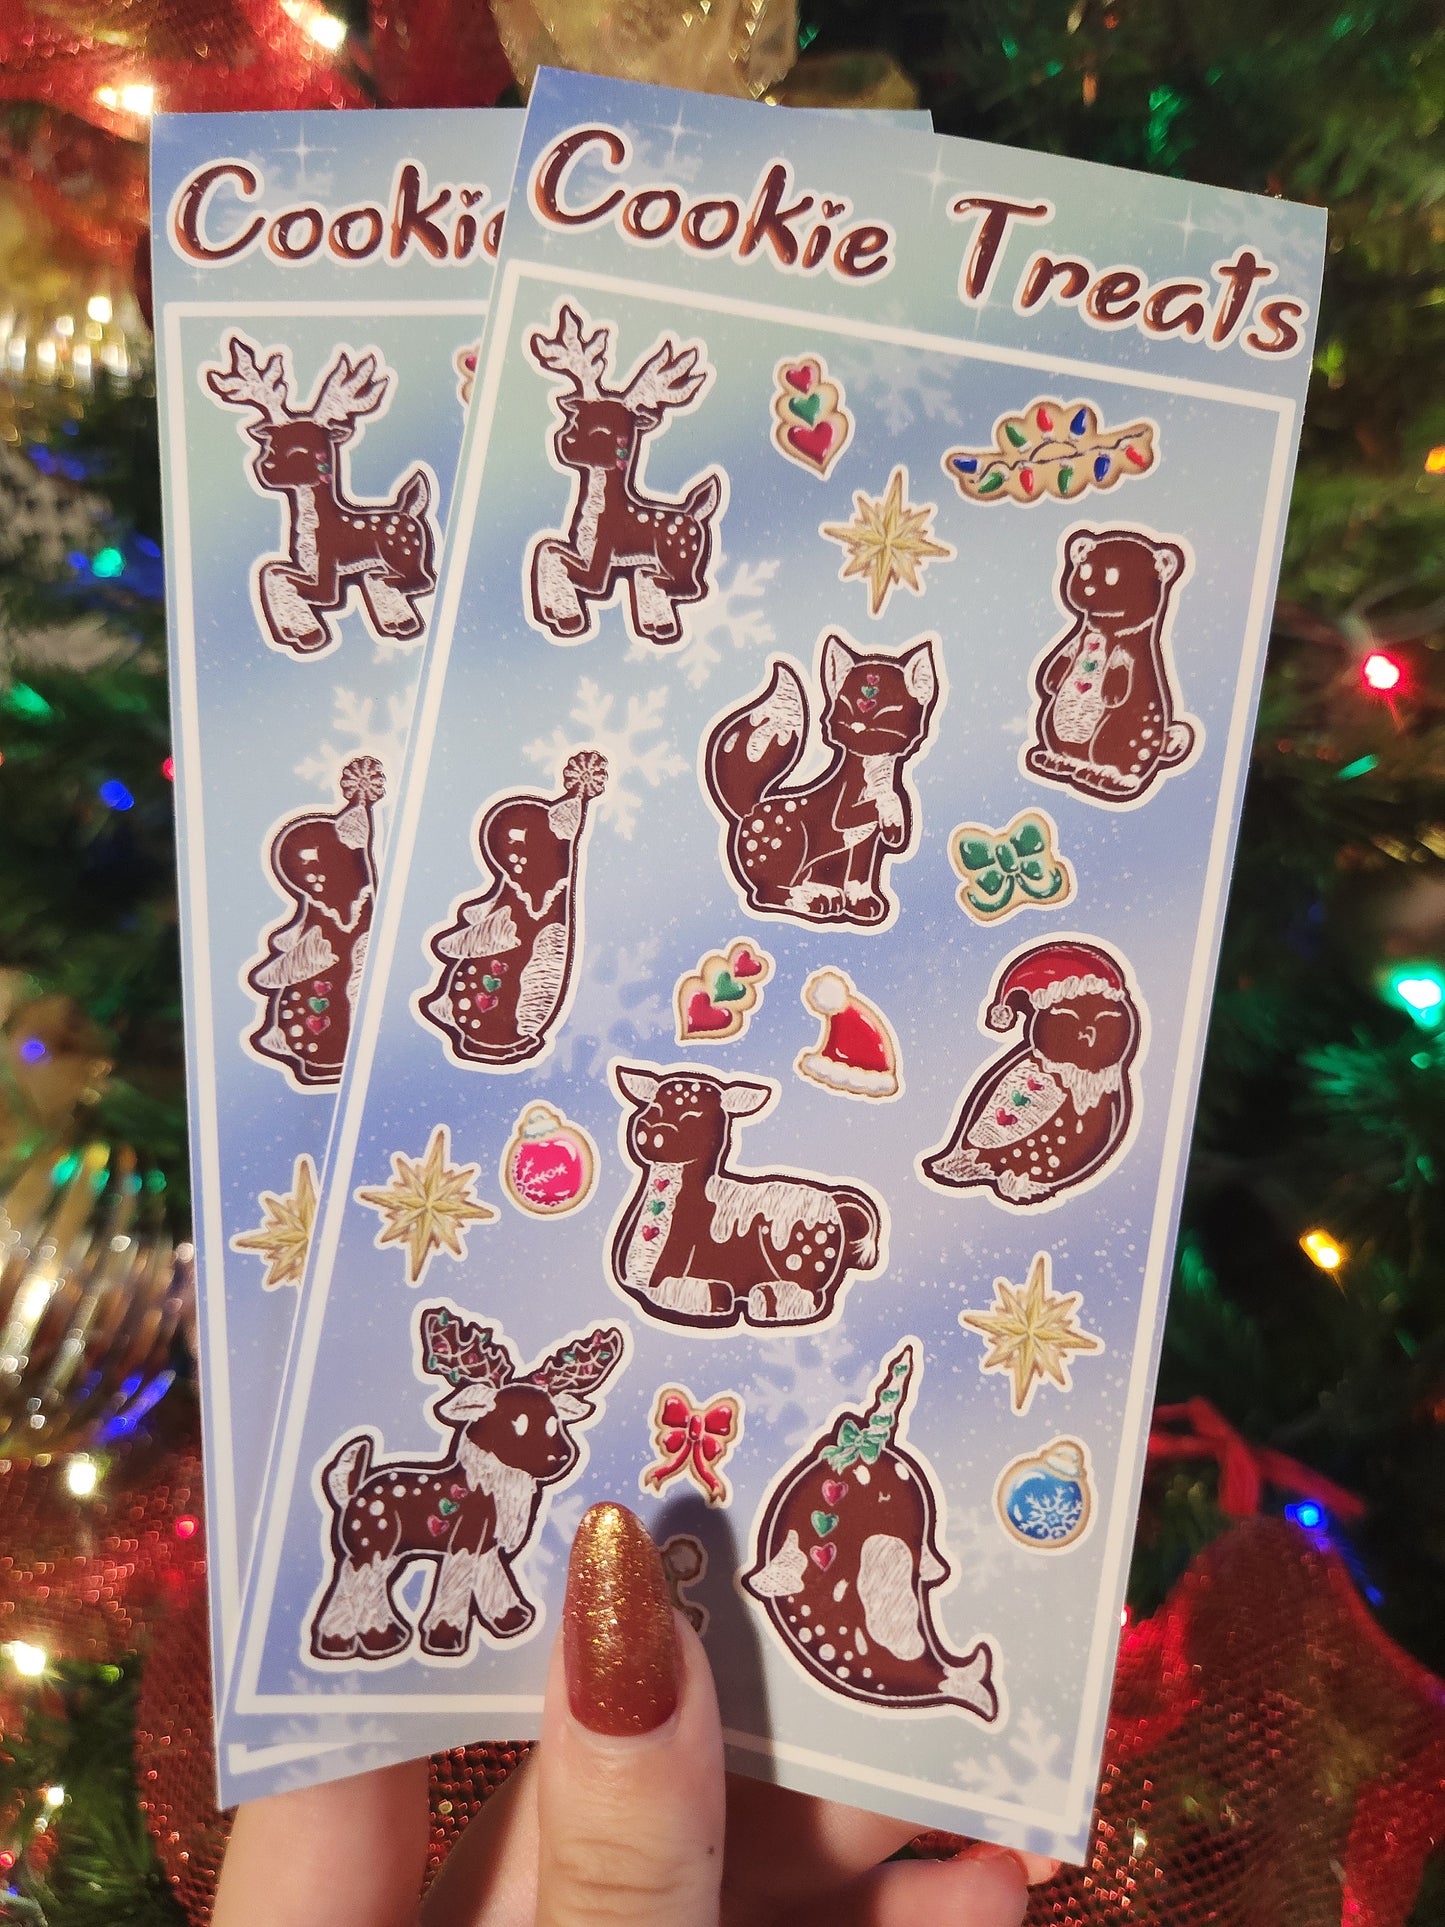 Cookie Treats - Holiday Gingerbread Animals